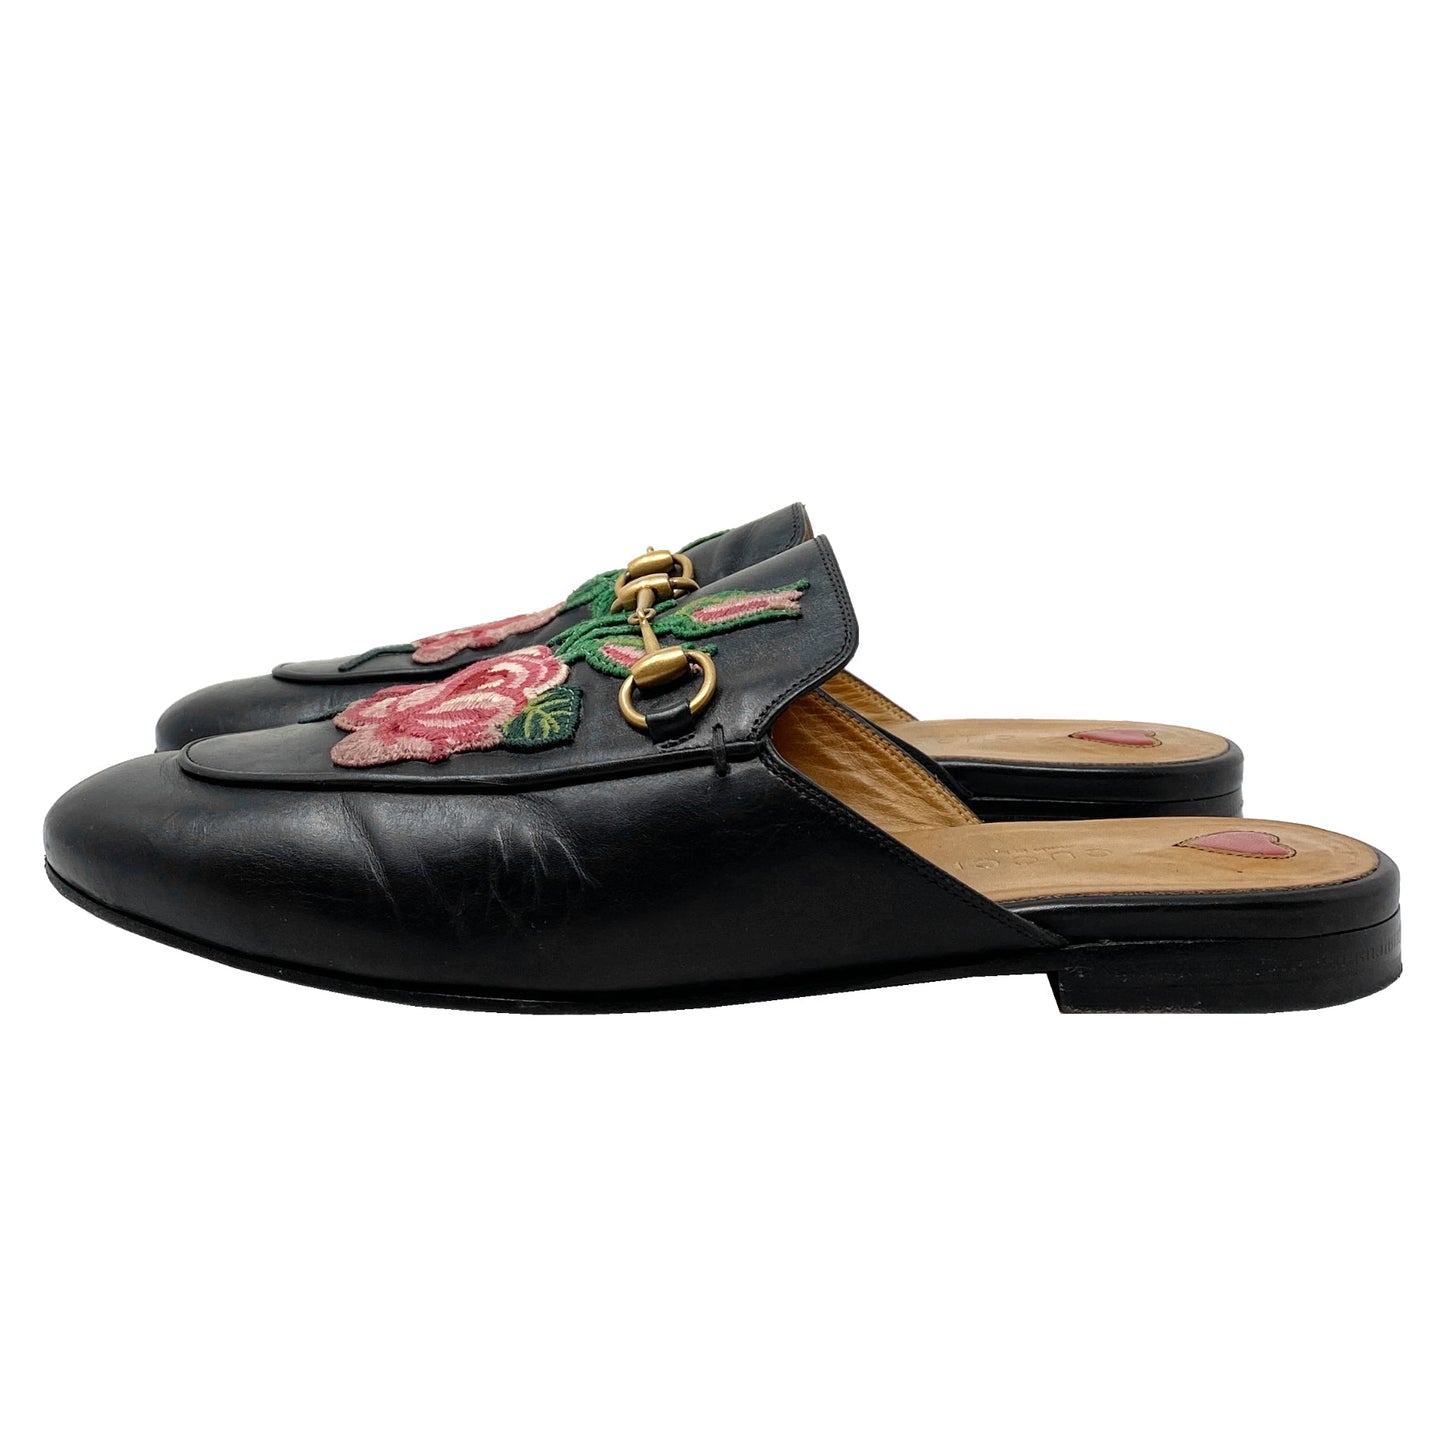 Gucci Princetown Horsebit Flower Embroidered Leather Loafer Mules 